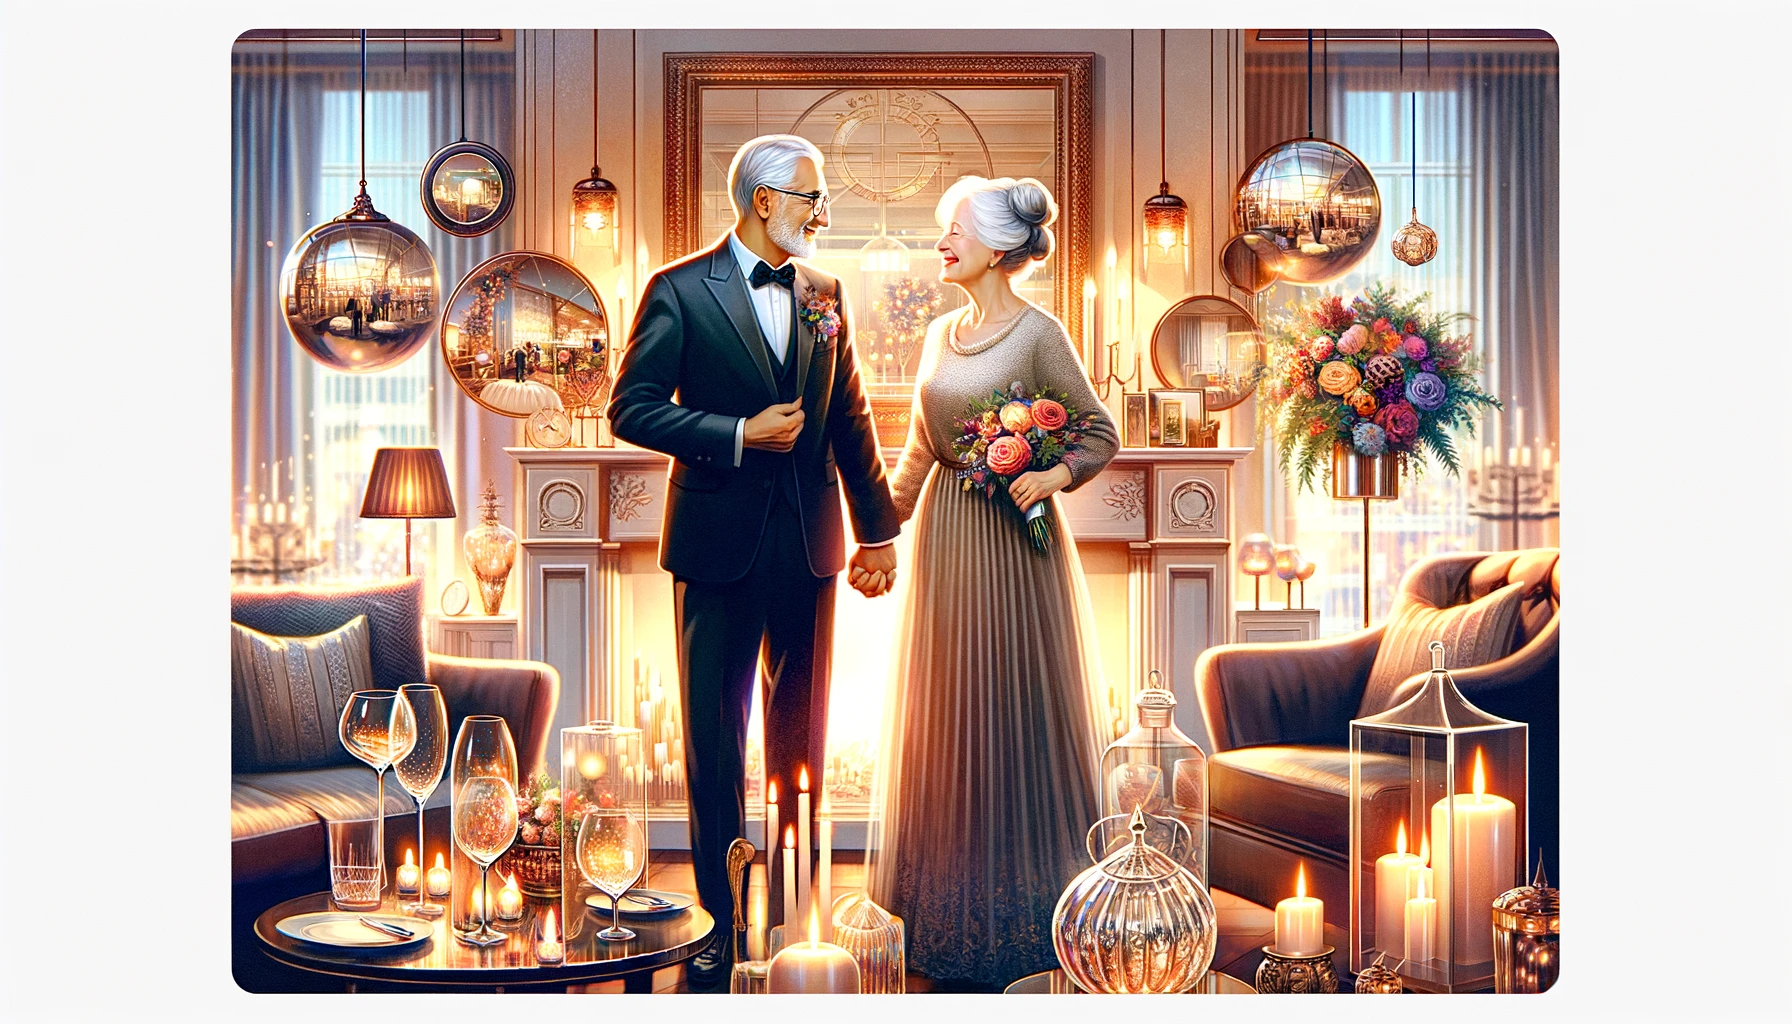 Celebration ideas for the 57th Wedding Anniversary